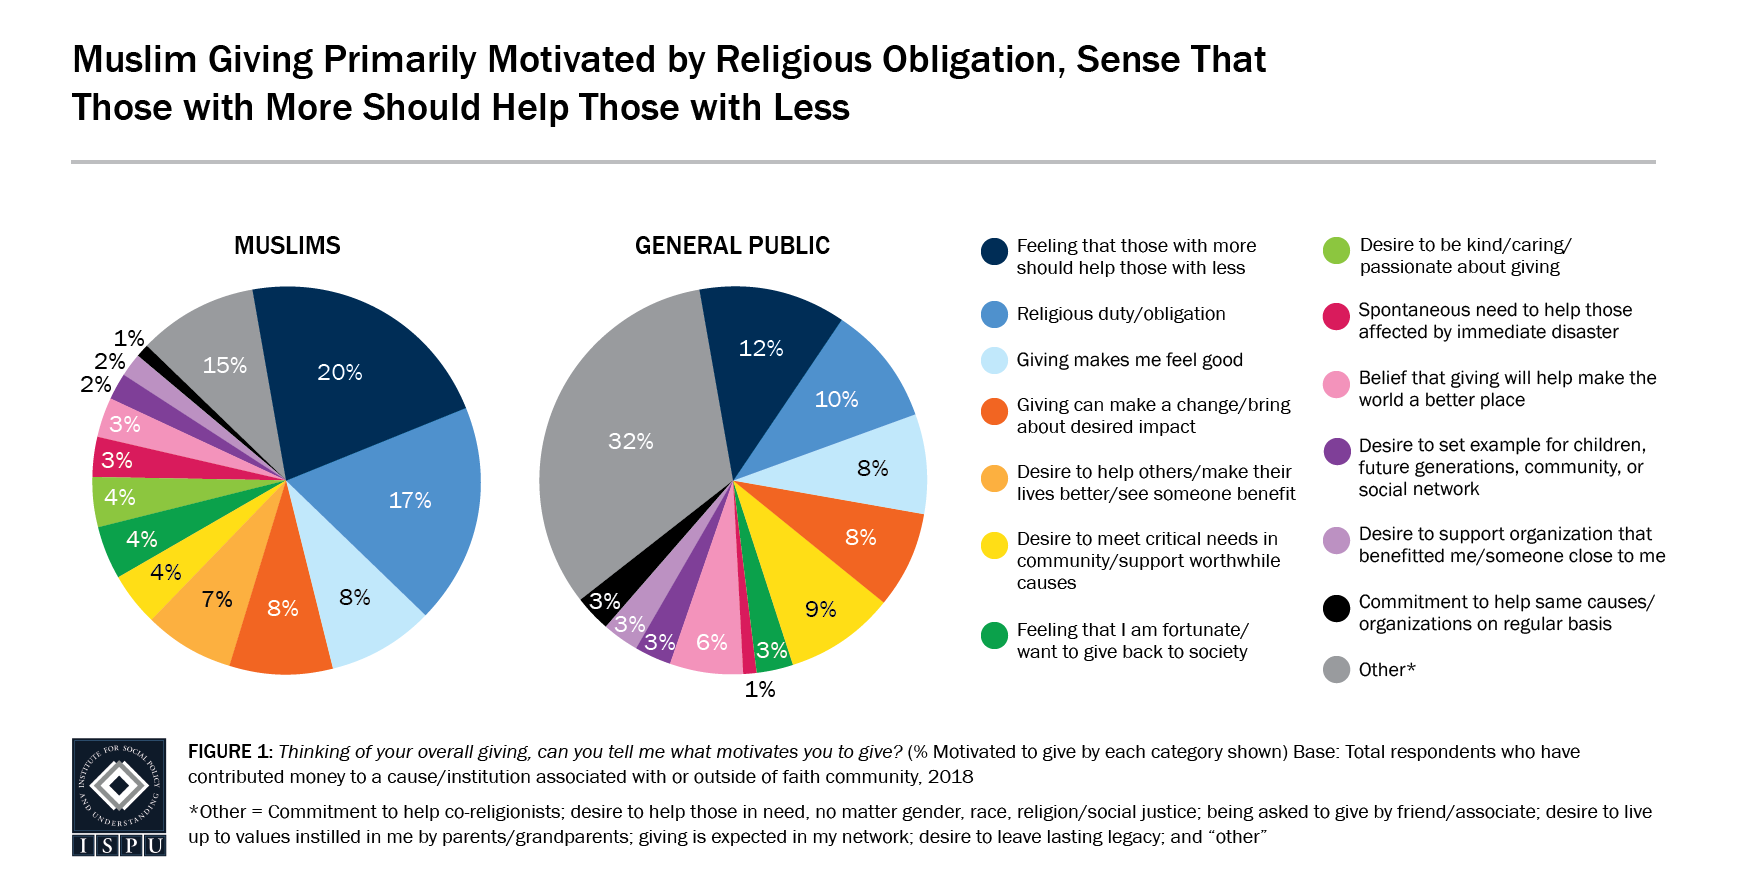 Figure 1: Two pie graphs showing that Muslim giving is primarily motivated by religious obligation and the sense that those with more should help those with less